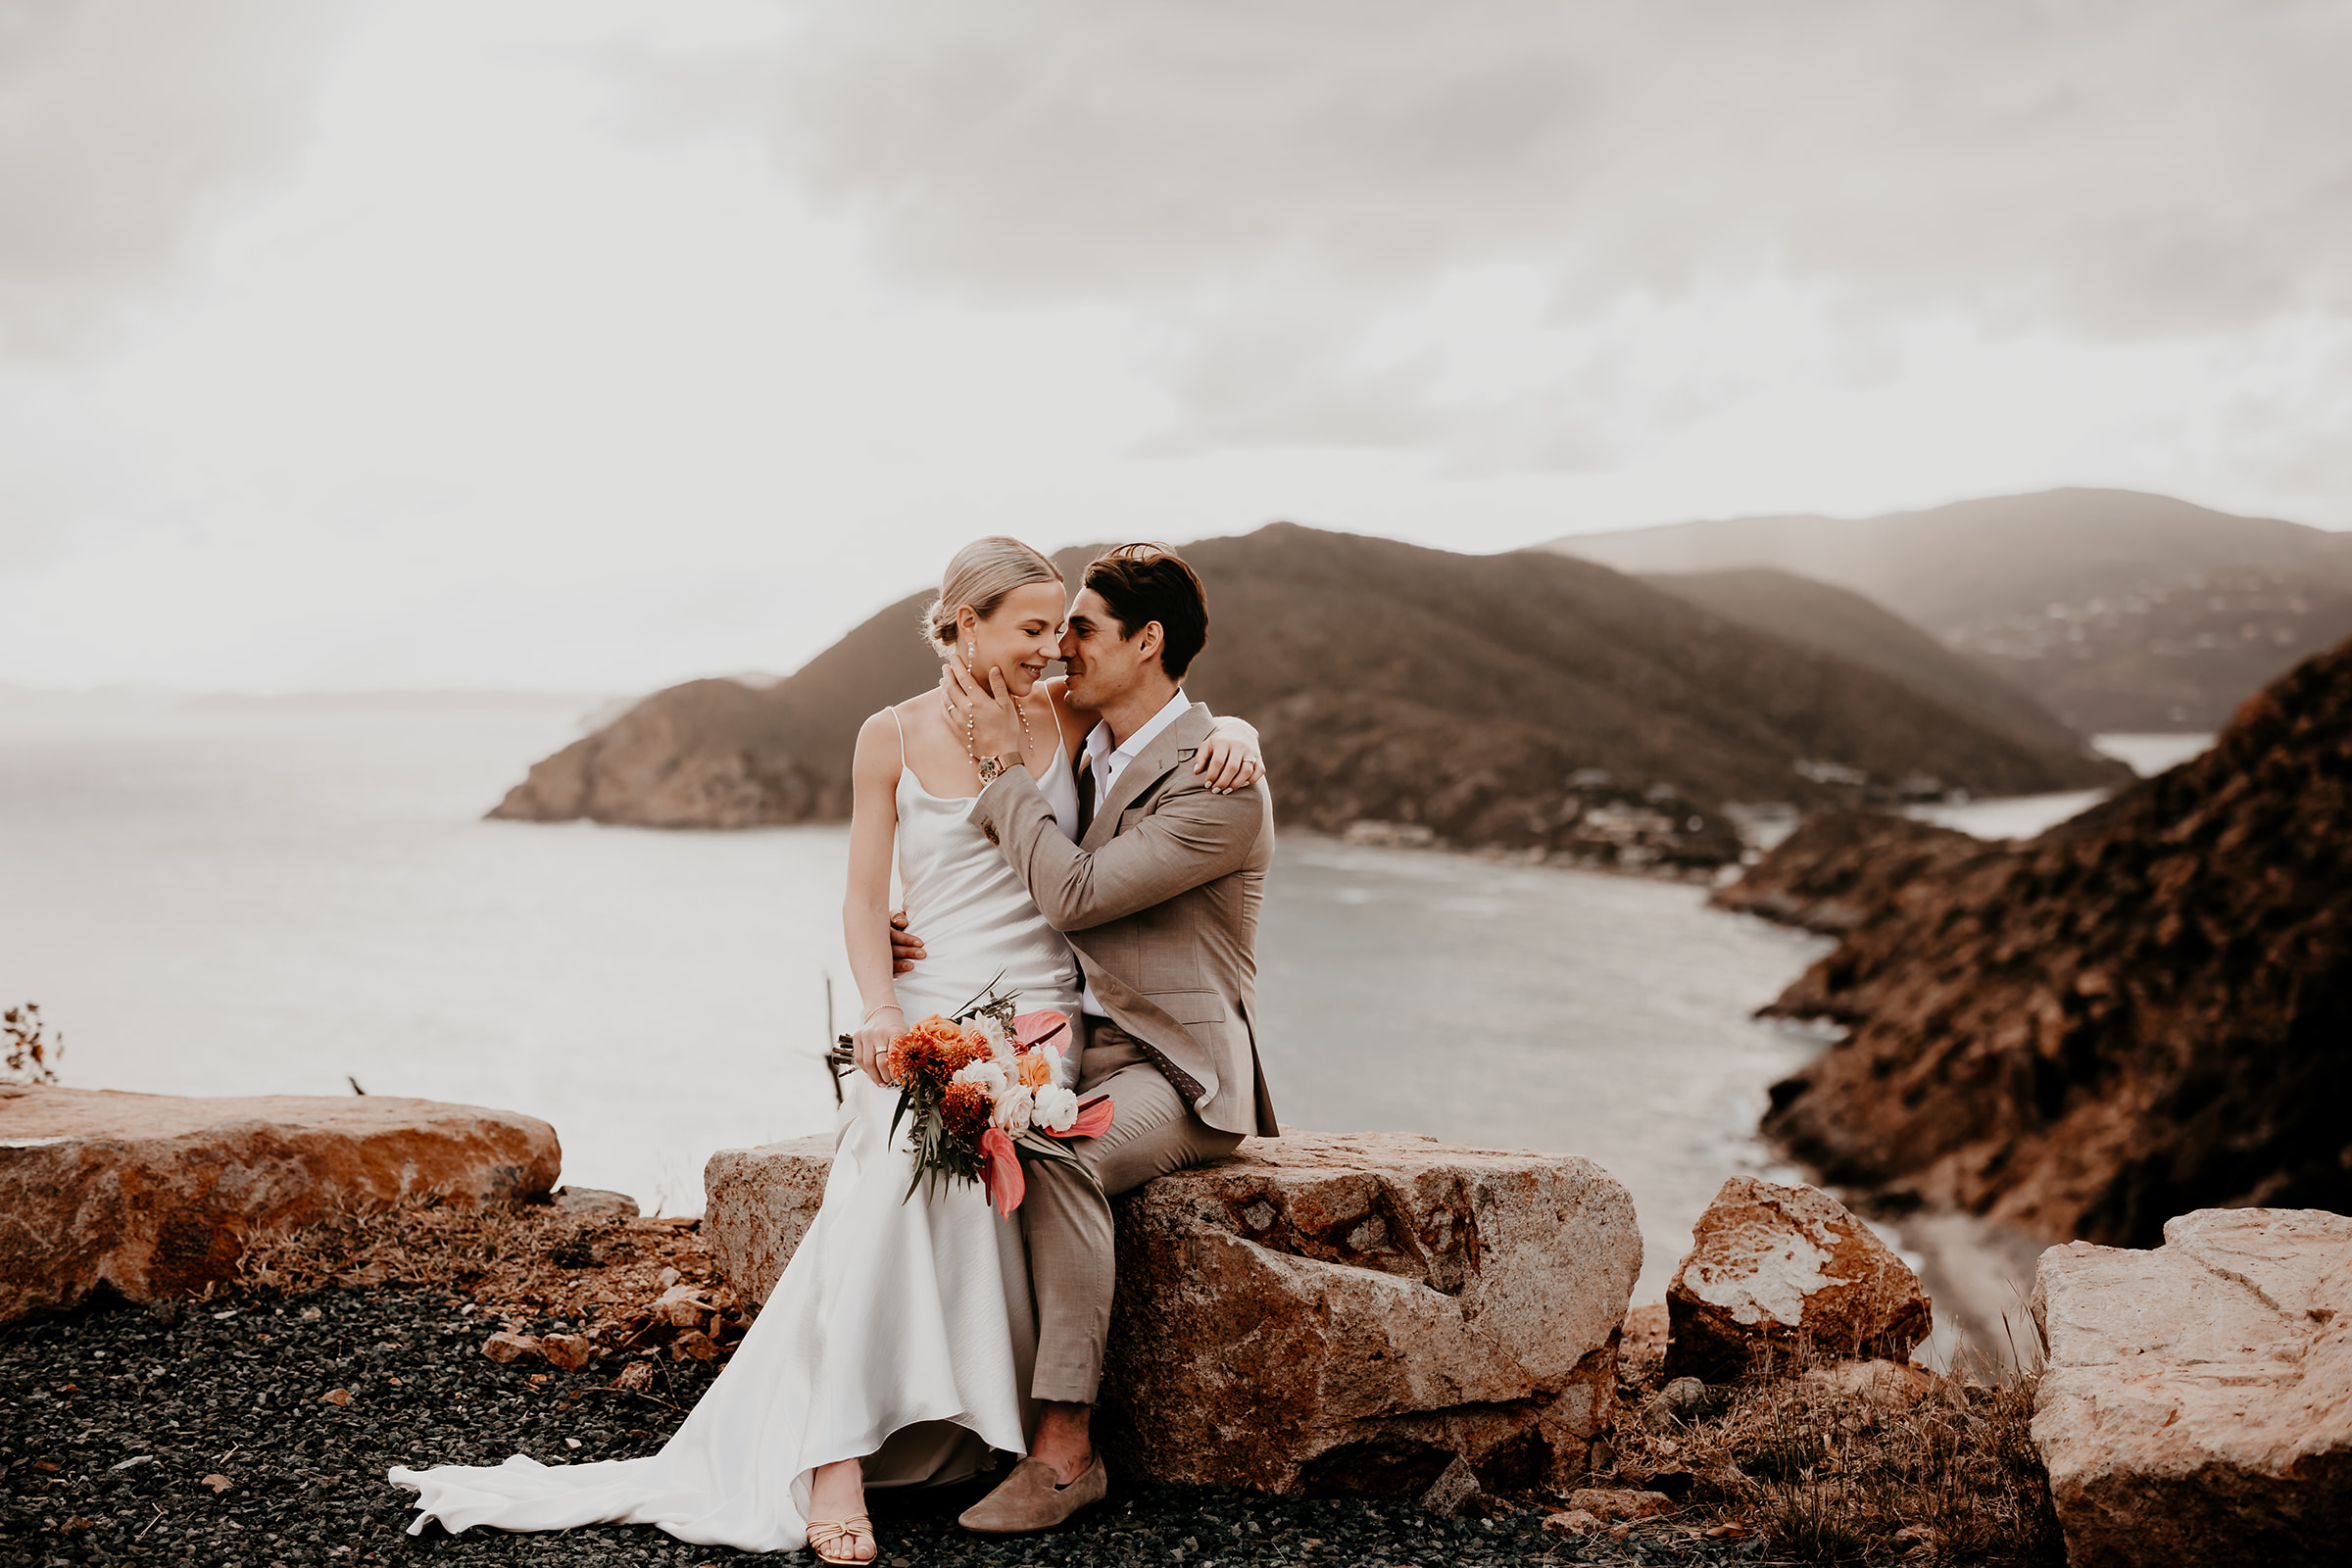 Capture the magic of love against the stunning backdrop of Virgin Gorda's pristine beaches with our destination wedding 